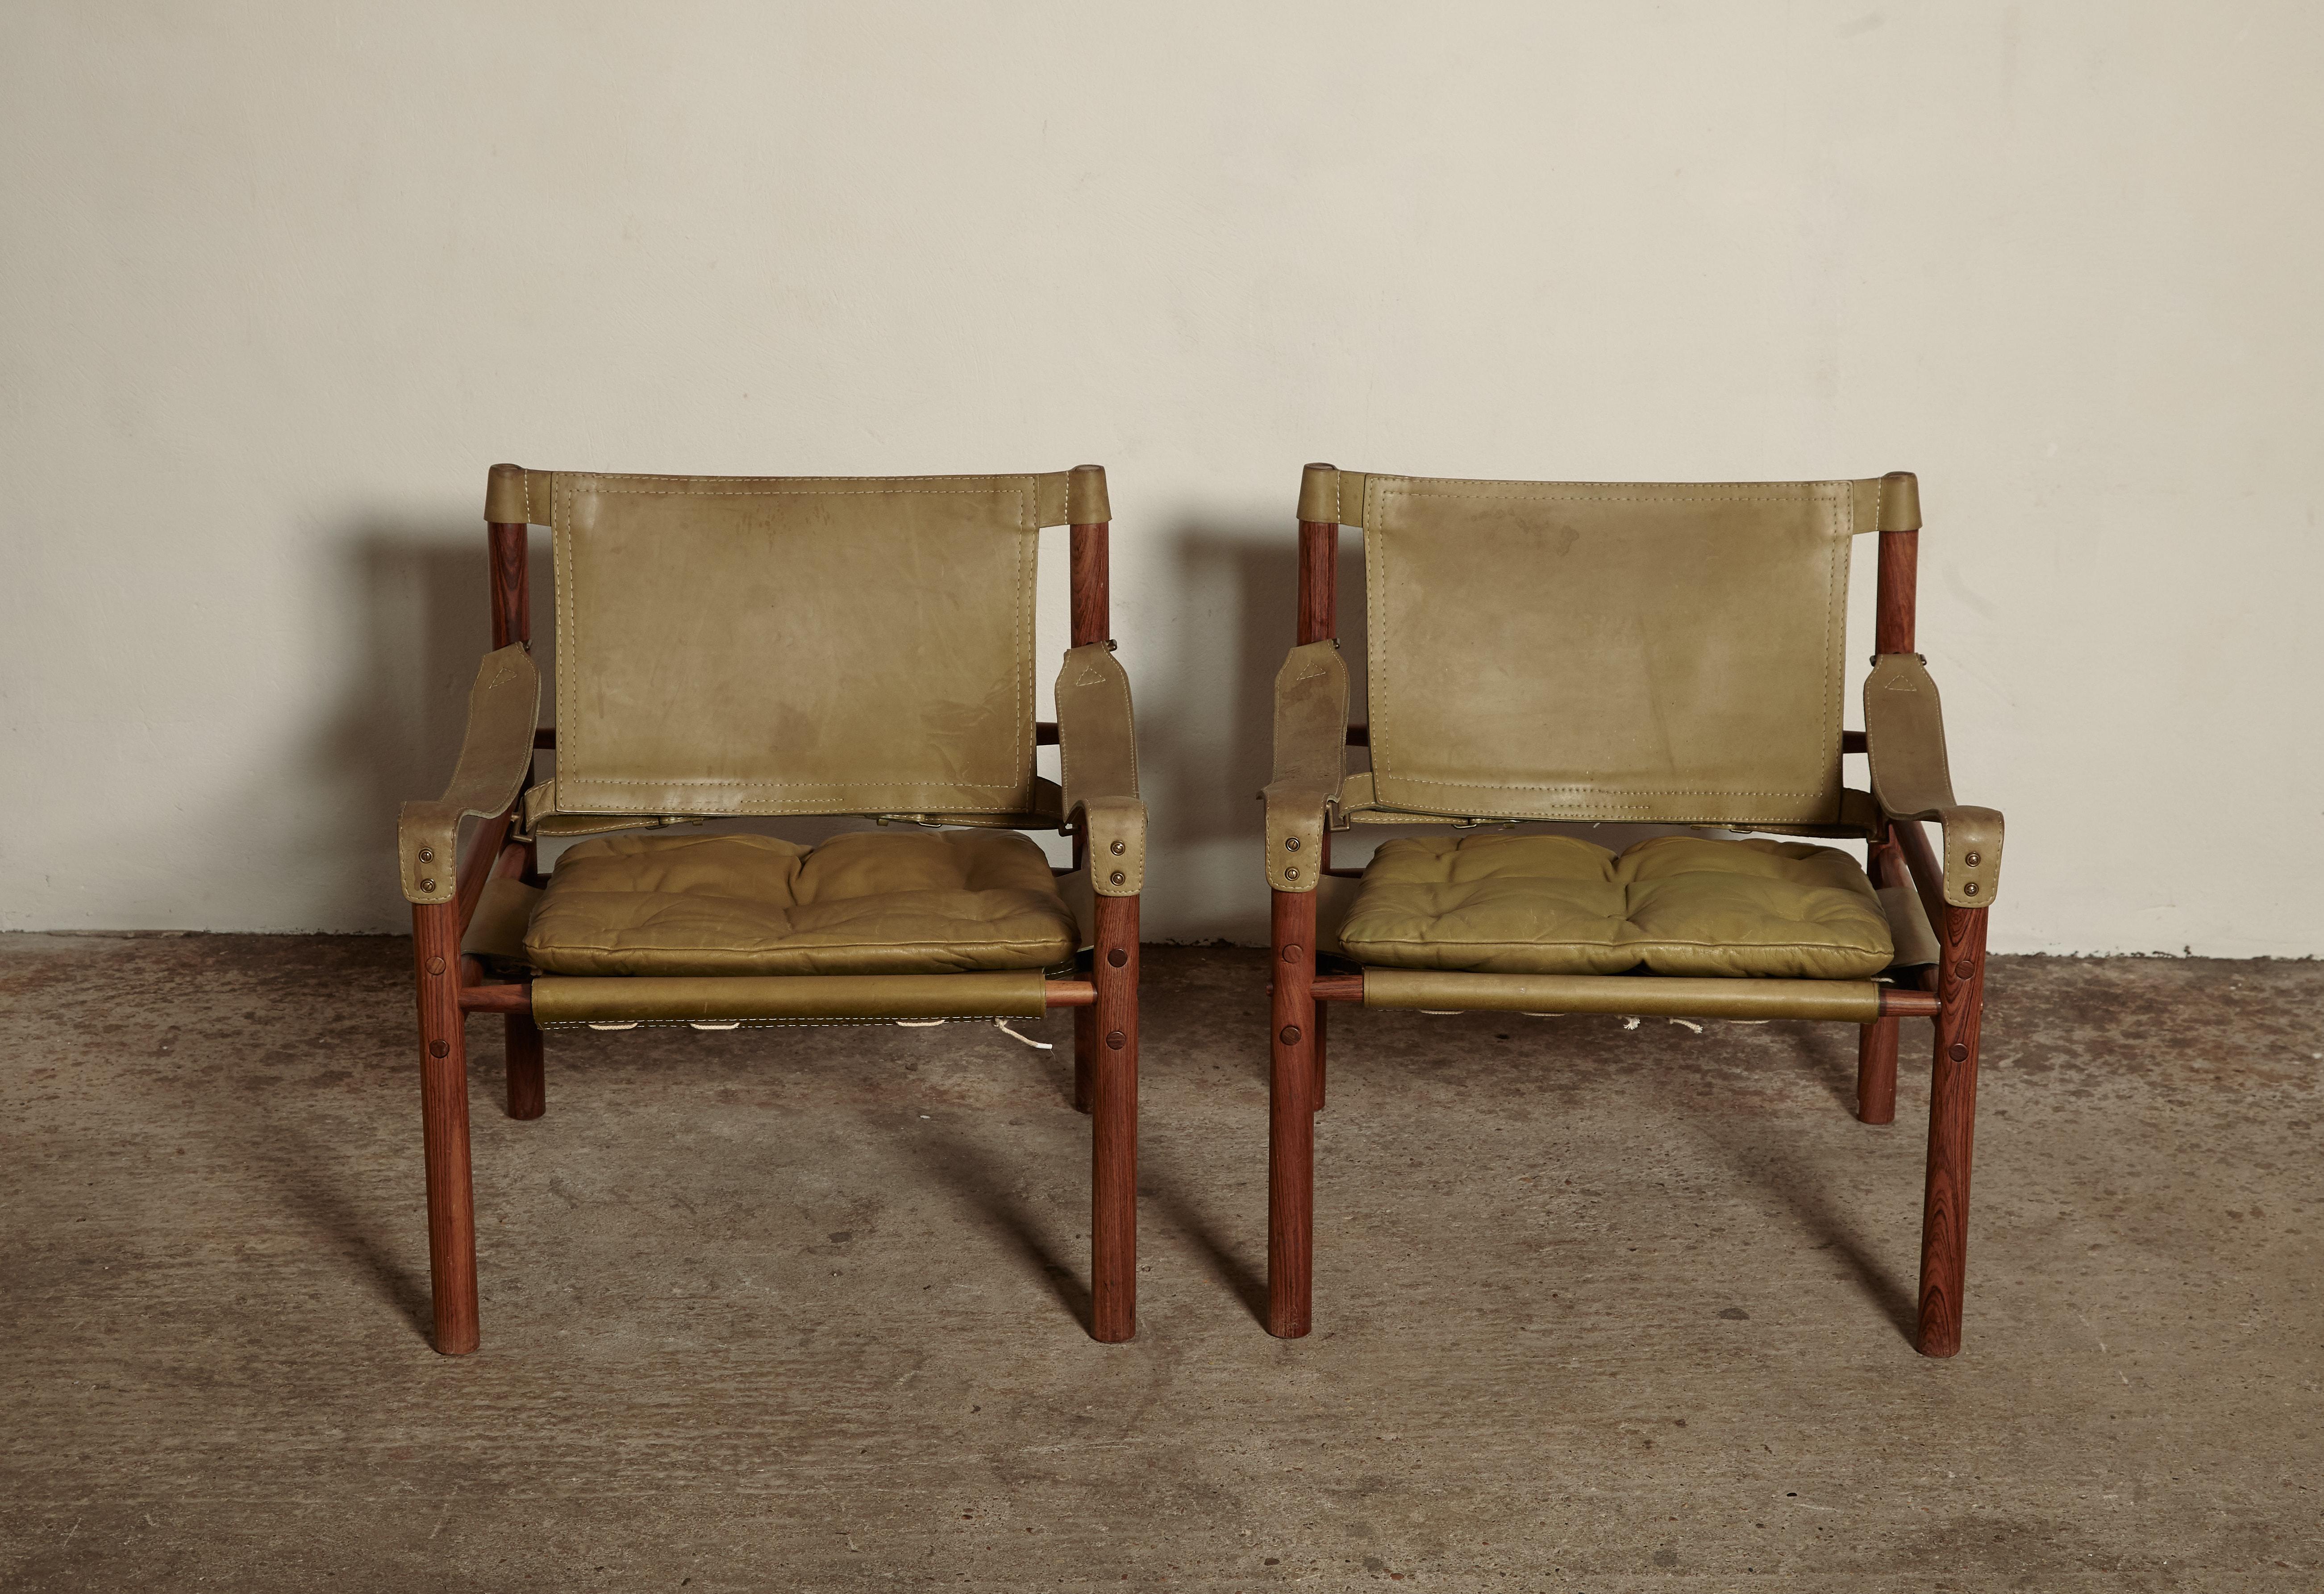 A rare authentic pair of original Arne Norell safari sirocco chairs in green leather. Made by Norell Mobler in Sweden (60s/70s) with makers label intact.

In good vintage condition, some marks and signs of wear relative to age. Frames are in great